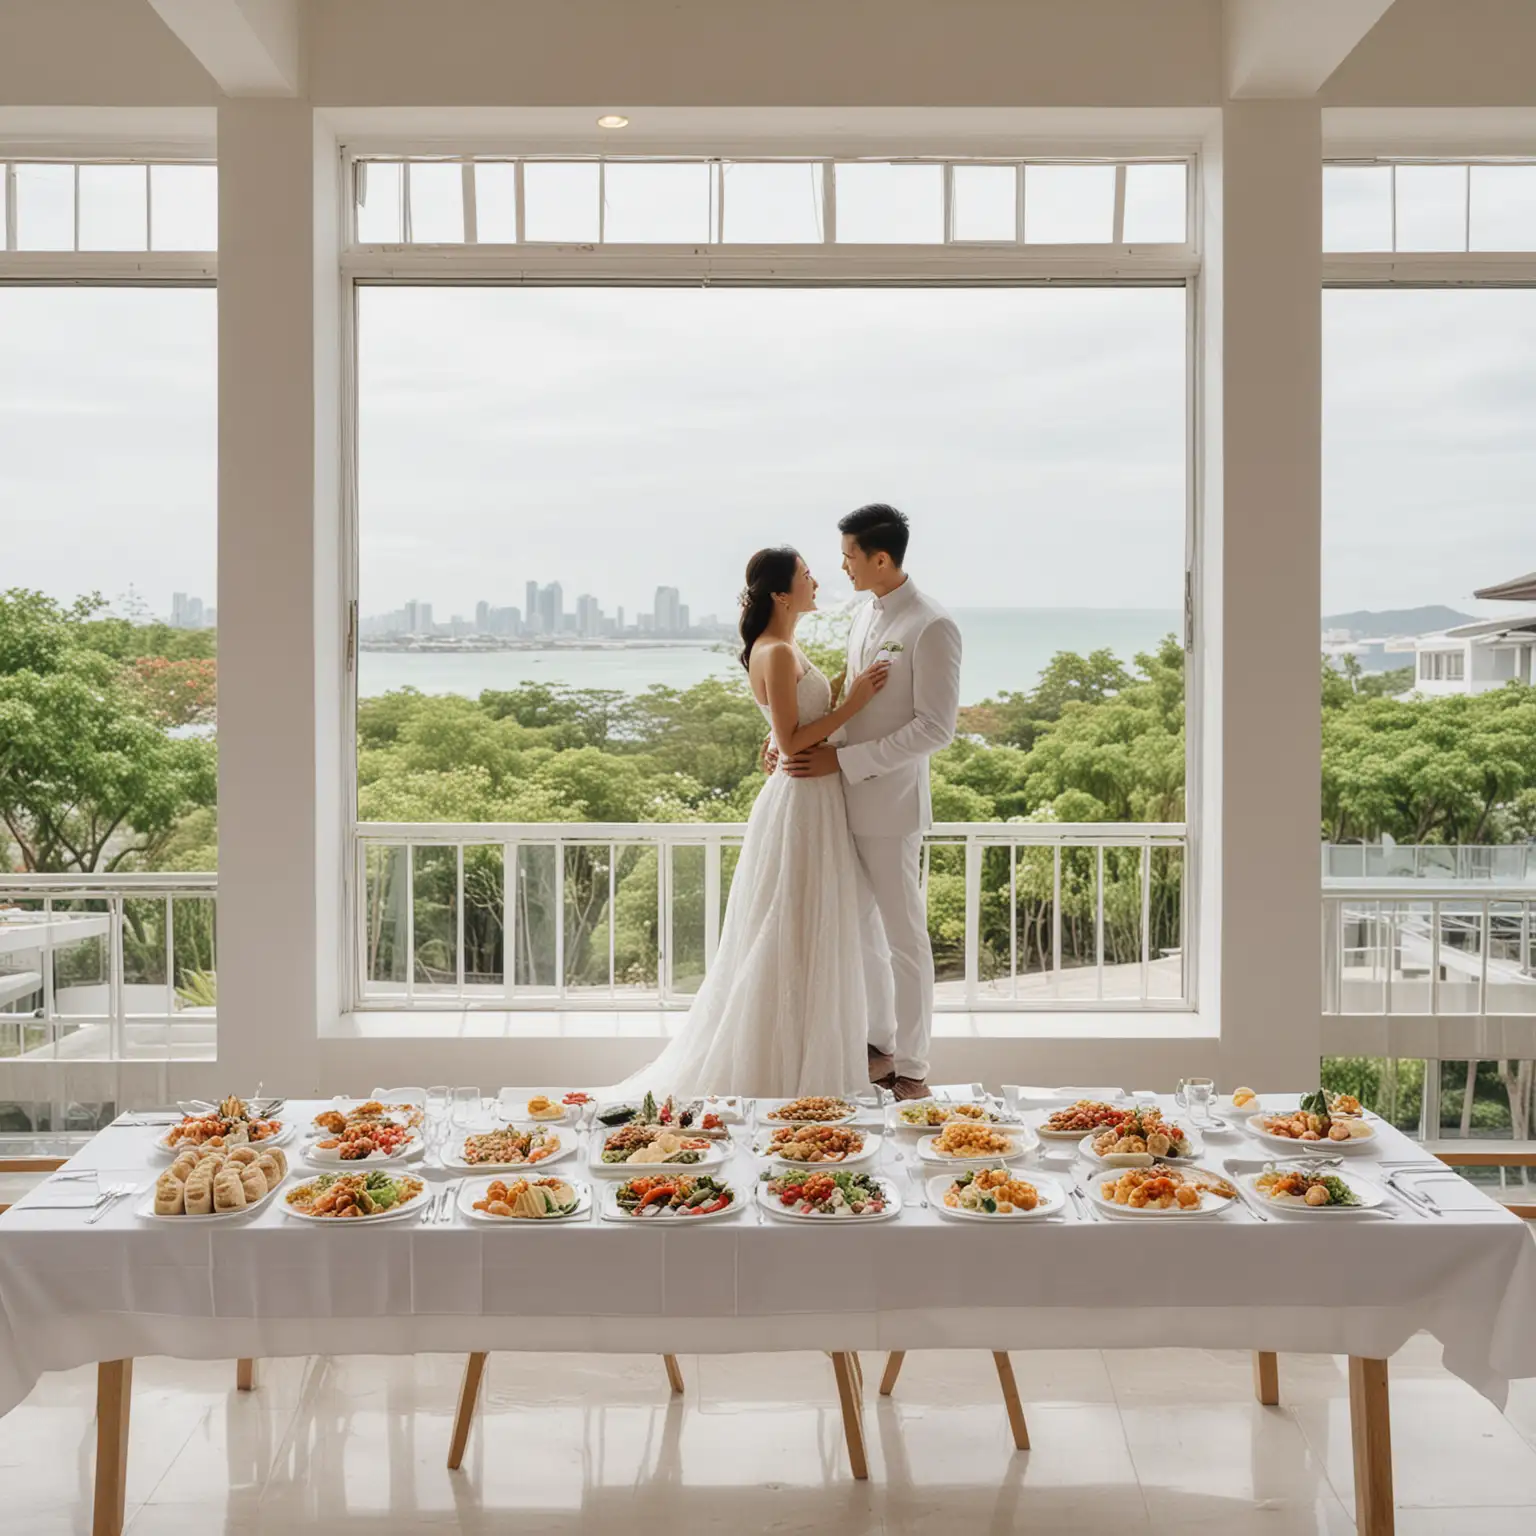 wedding buffet lunch, asian couple,  love, cafe, poolview, white window frame
